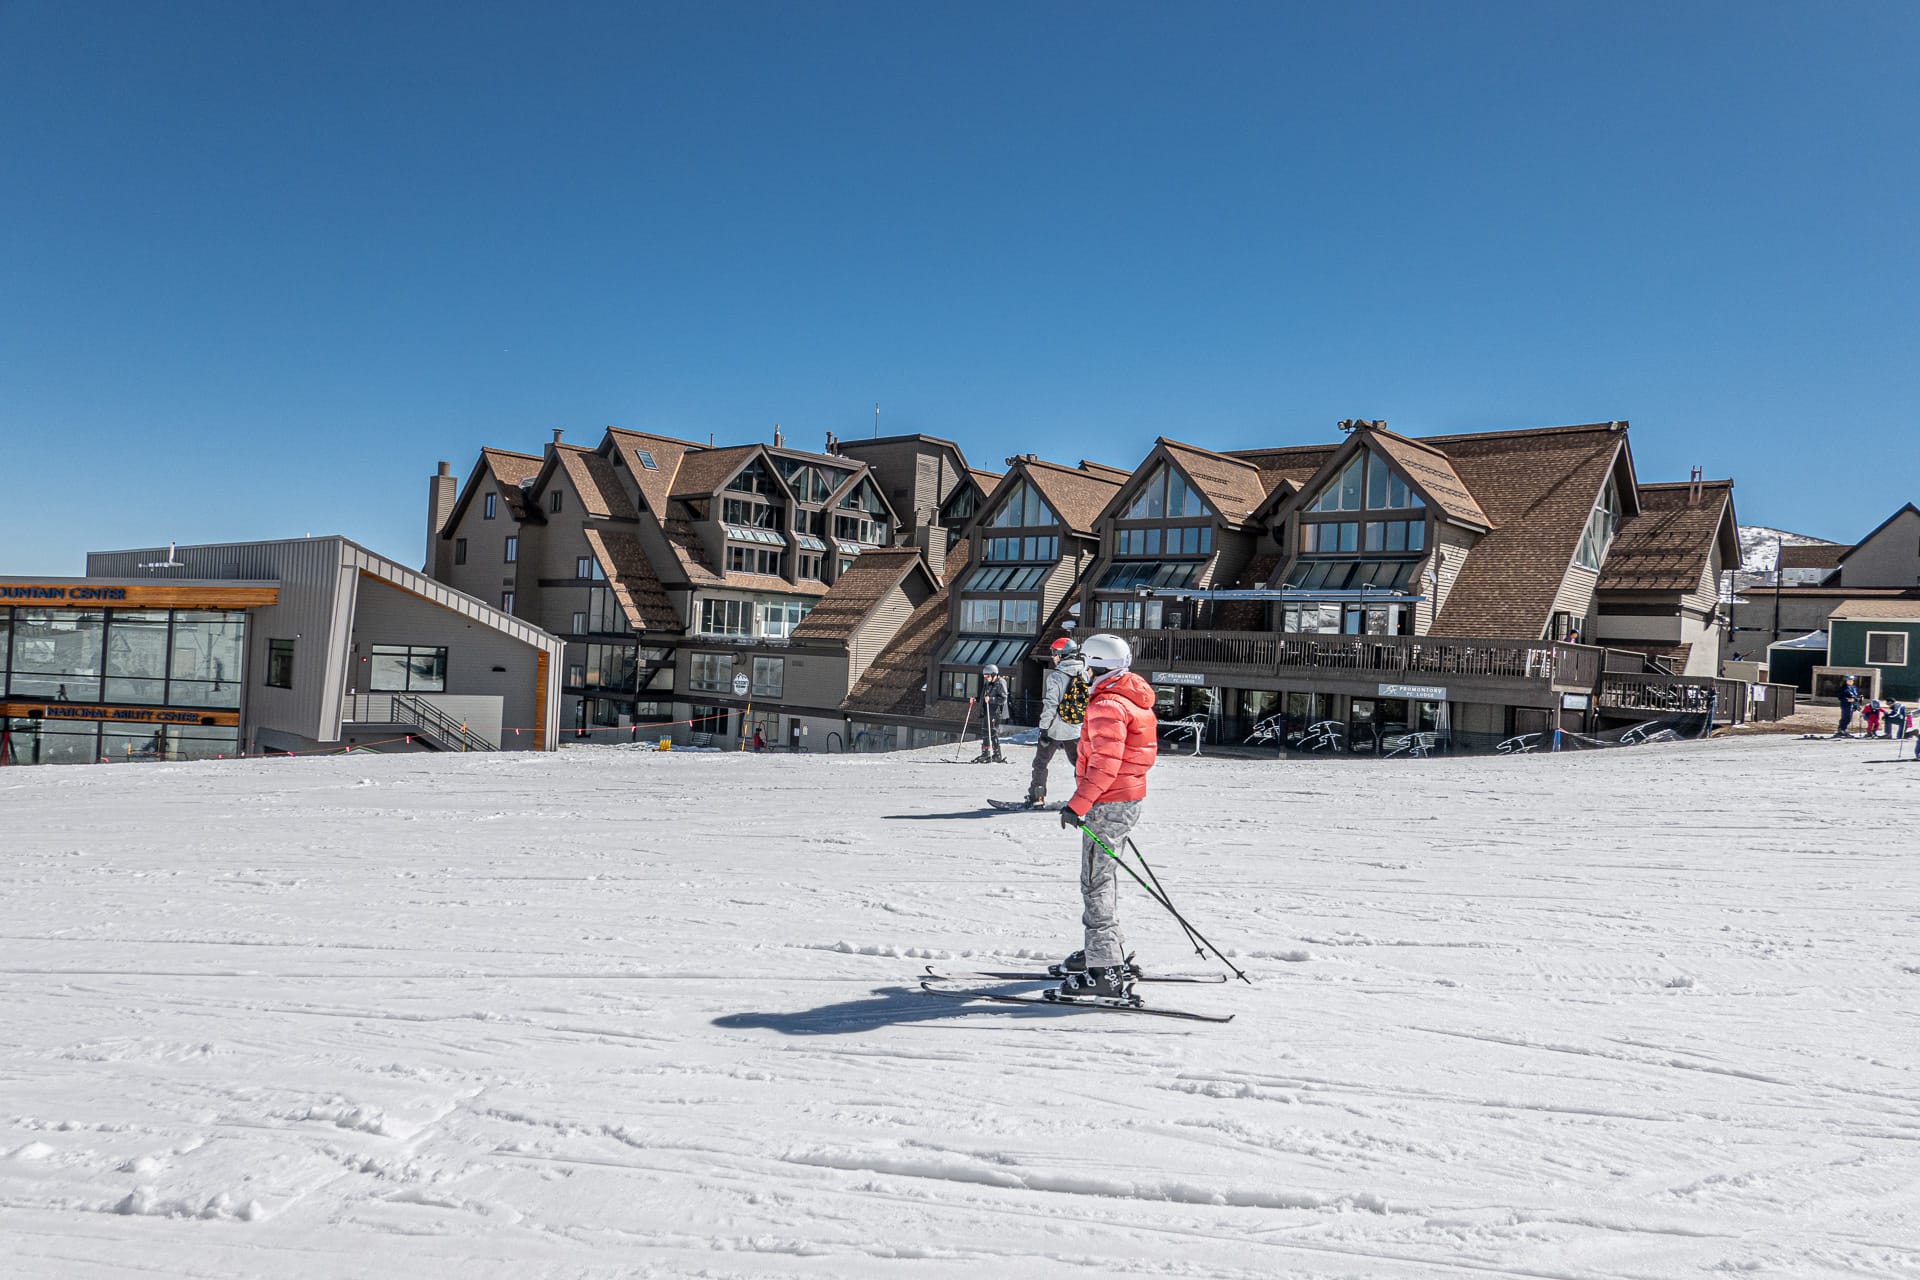 Ski-in/Ski-out access to The Lodge at Mountain Village